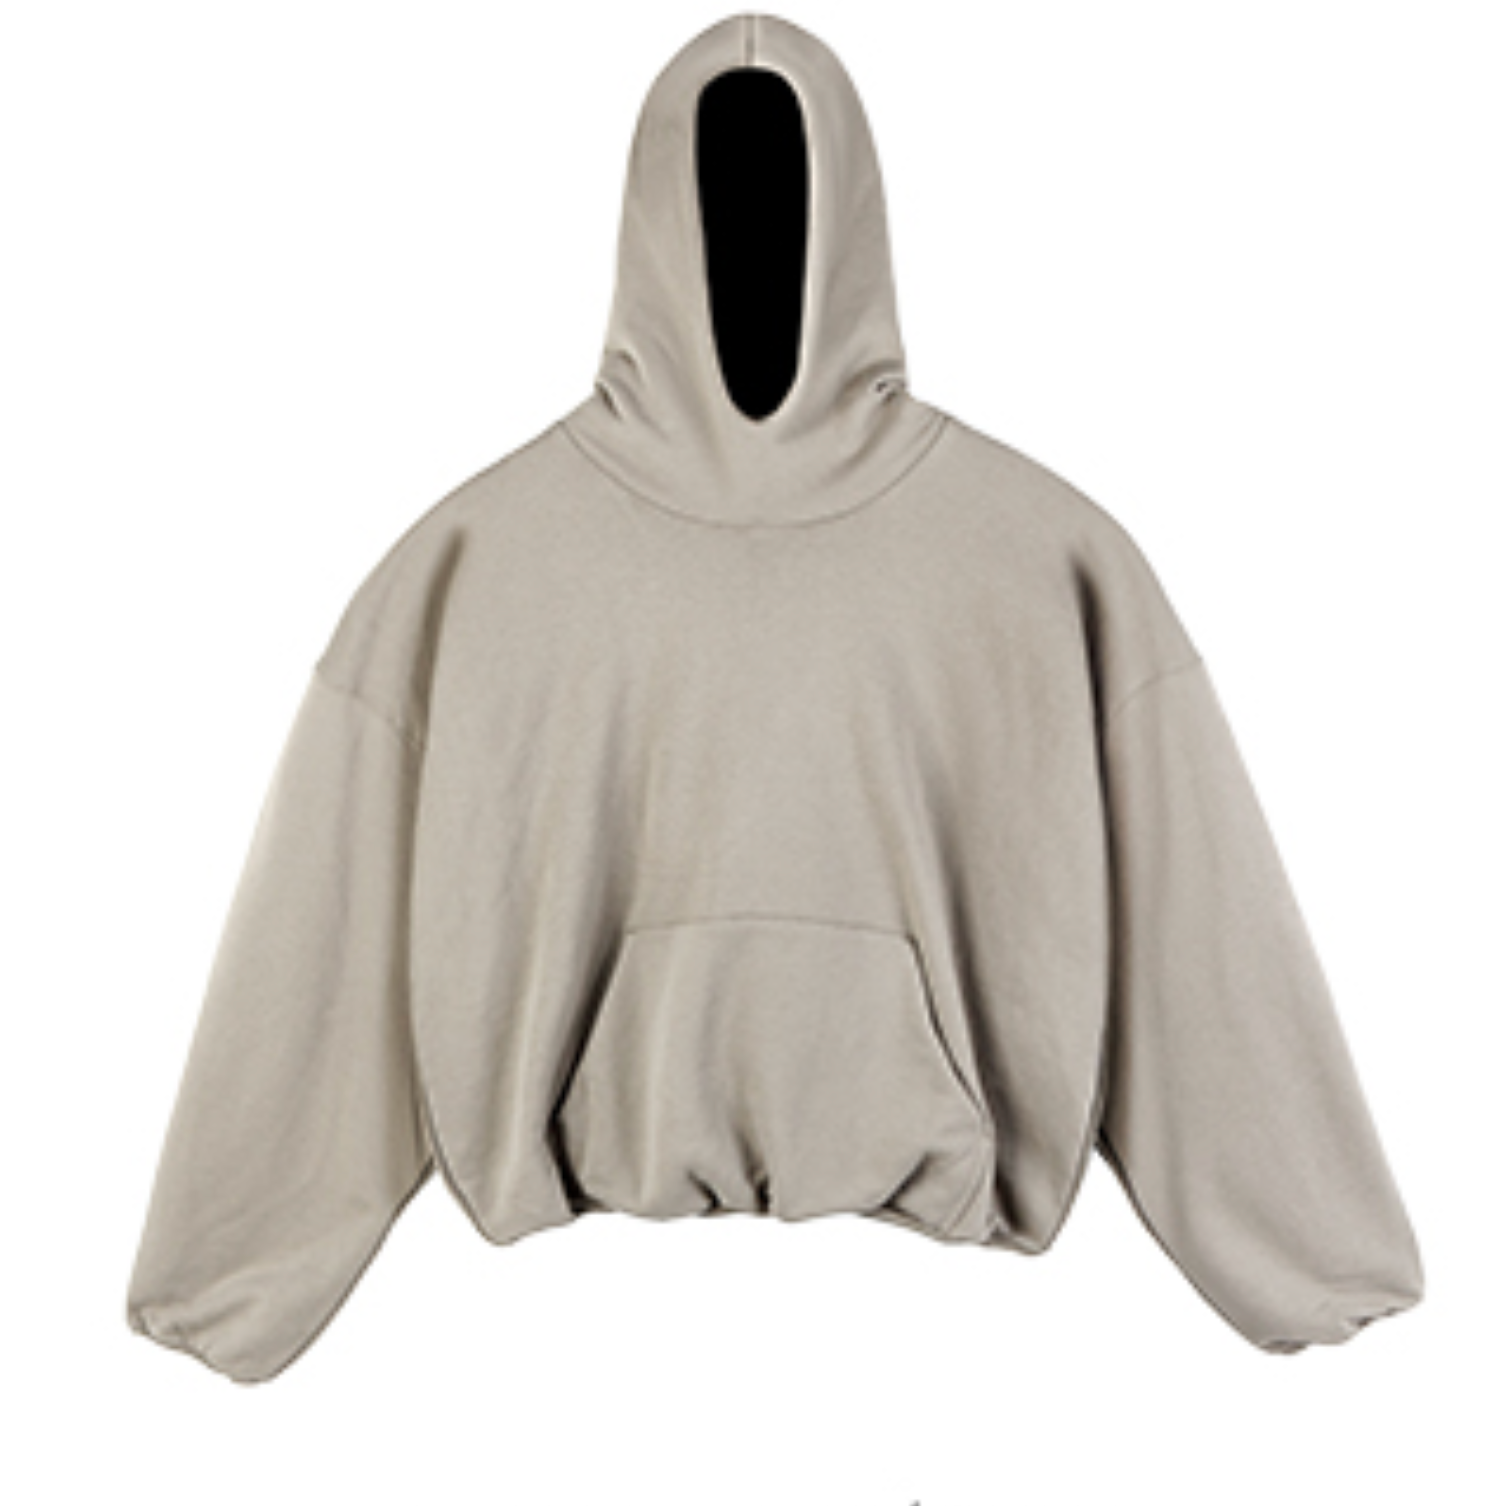 Hoodie layering coordinates! From how to choose recommended hoodie